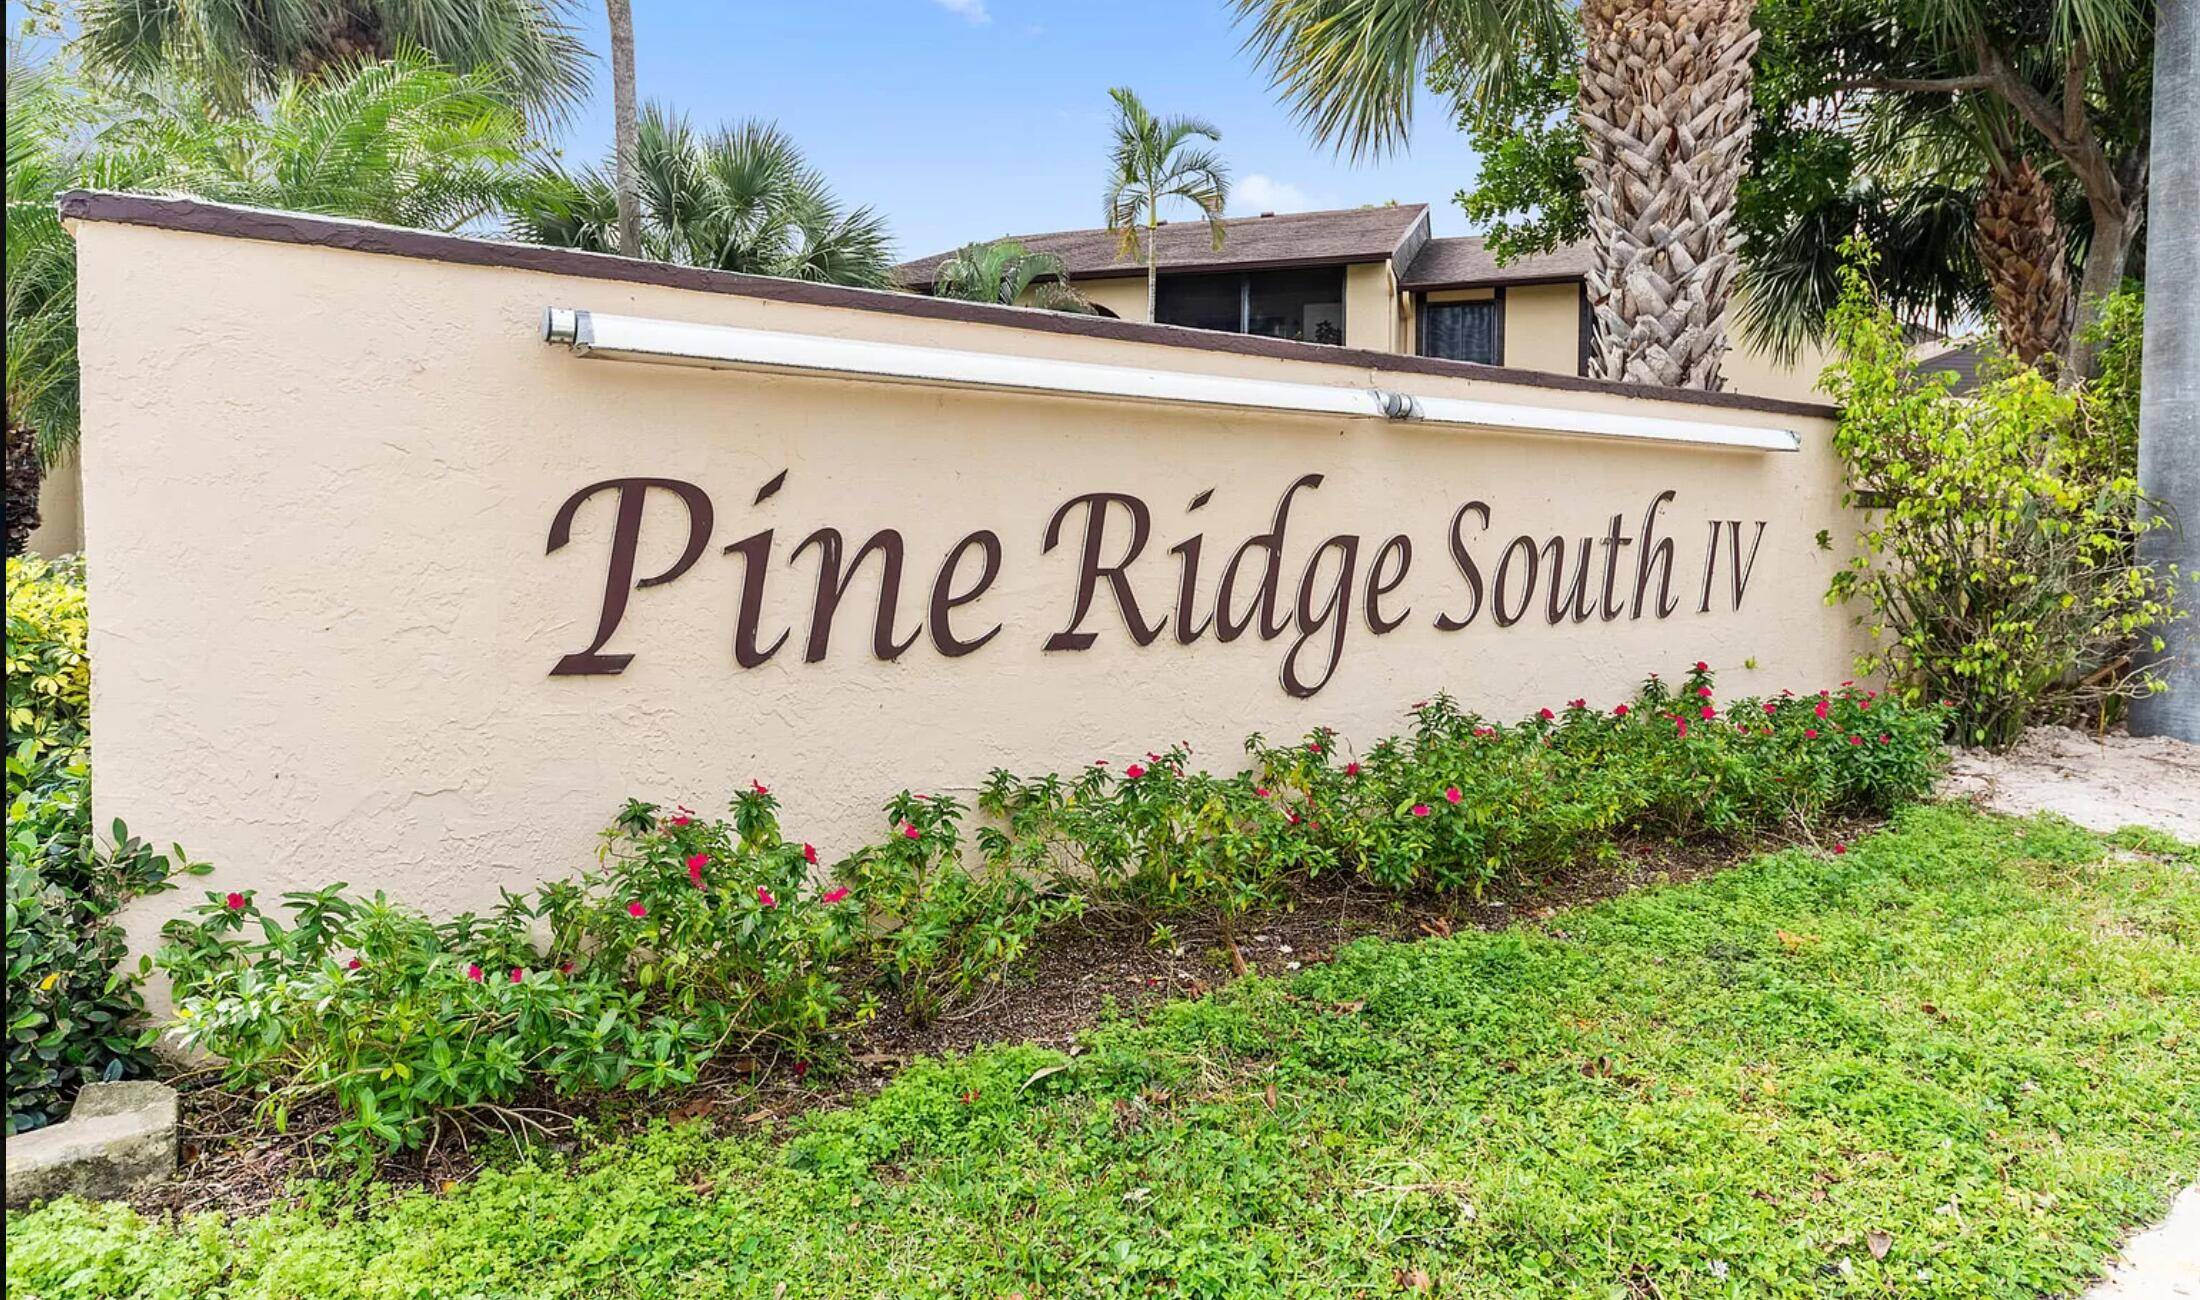 Welcome to this beautiful condo in Pine Ridge South.